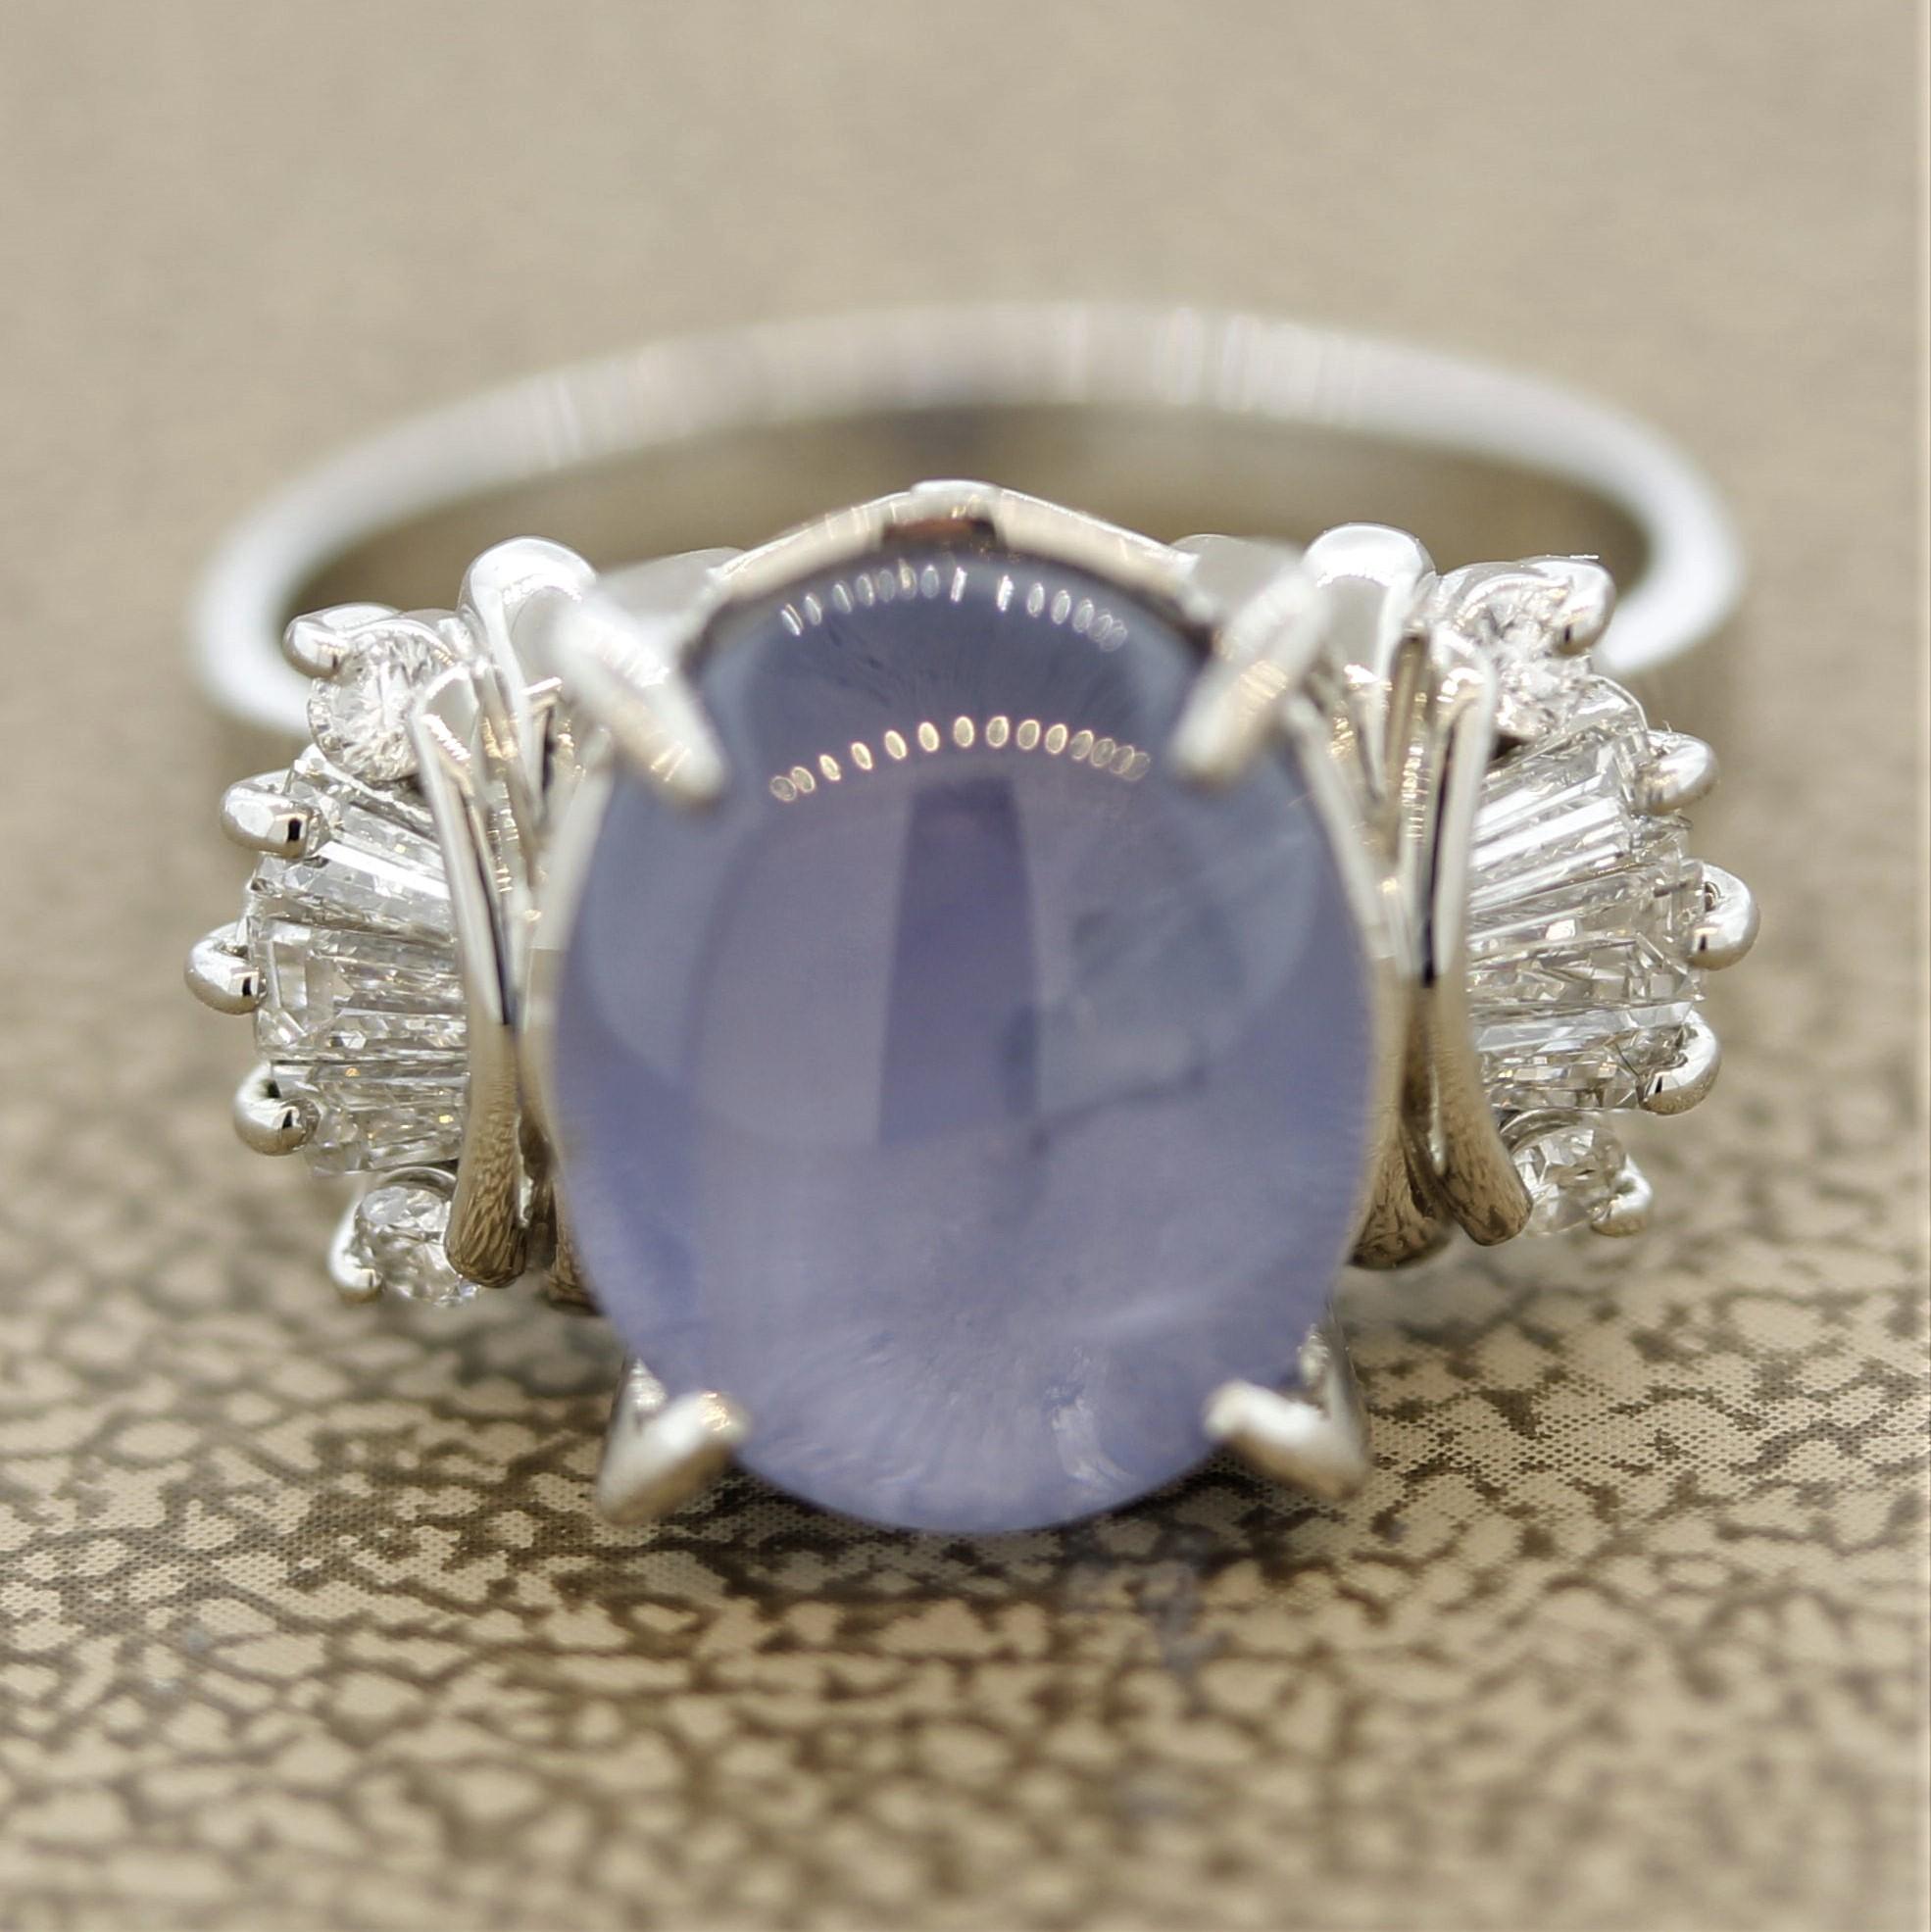 A lovely cabochon sapphire takes center stage. It weighs 7.90 carats and has fantastic asterism, which is the star effect when light hits the stone. A strong bright 6 rayed star can be seen on the sapphire. It is accented by 0.36 carats of round